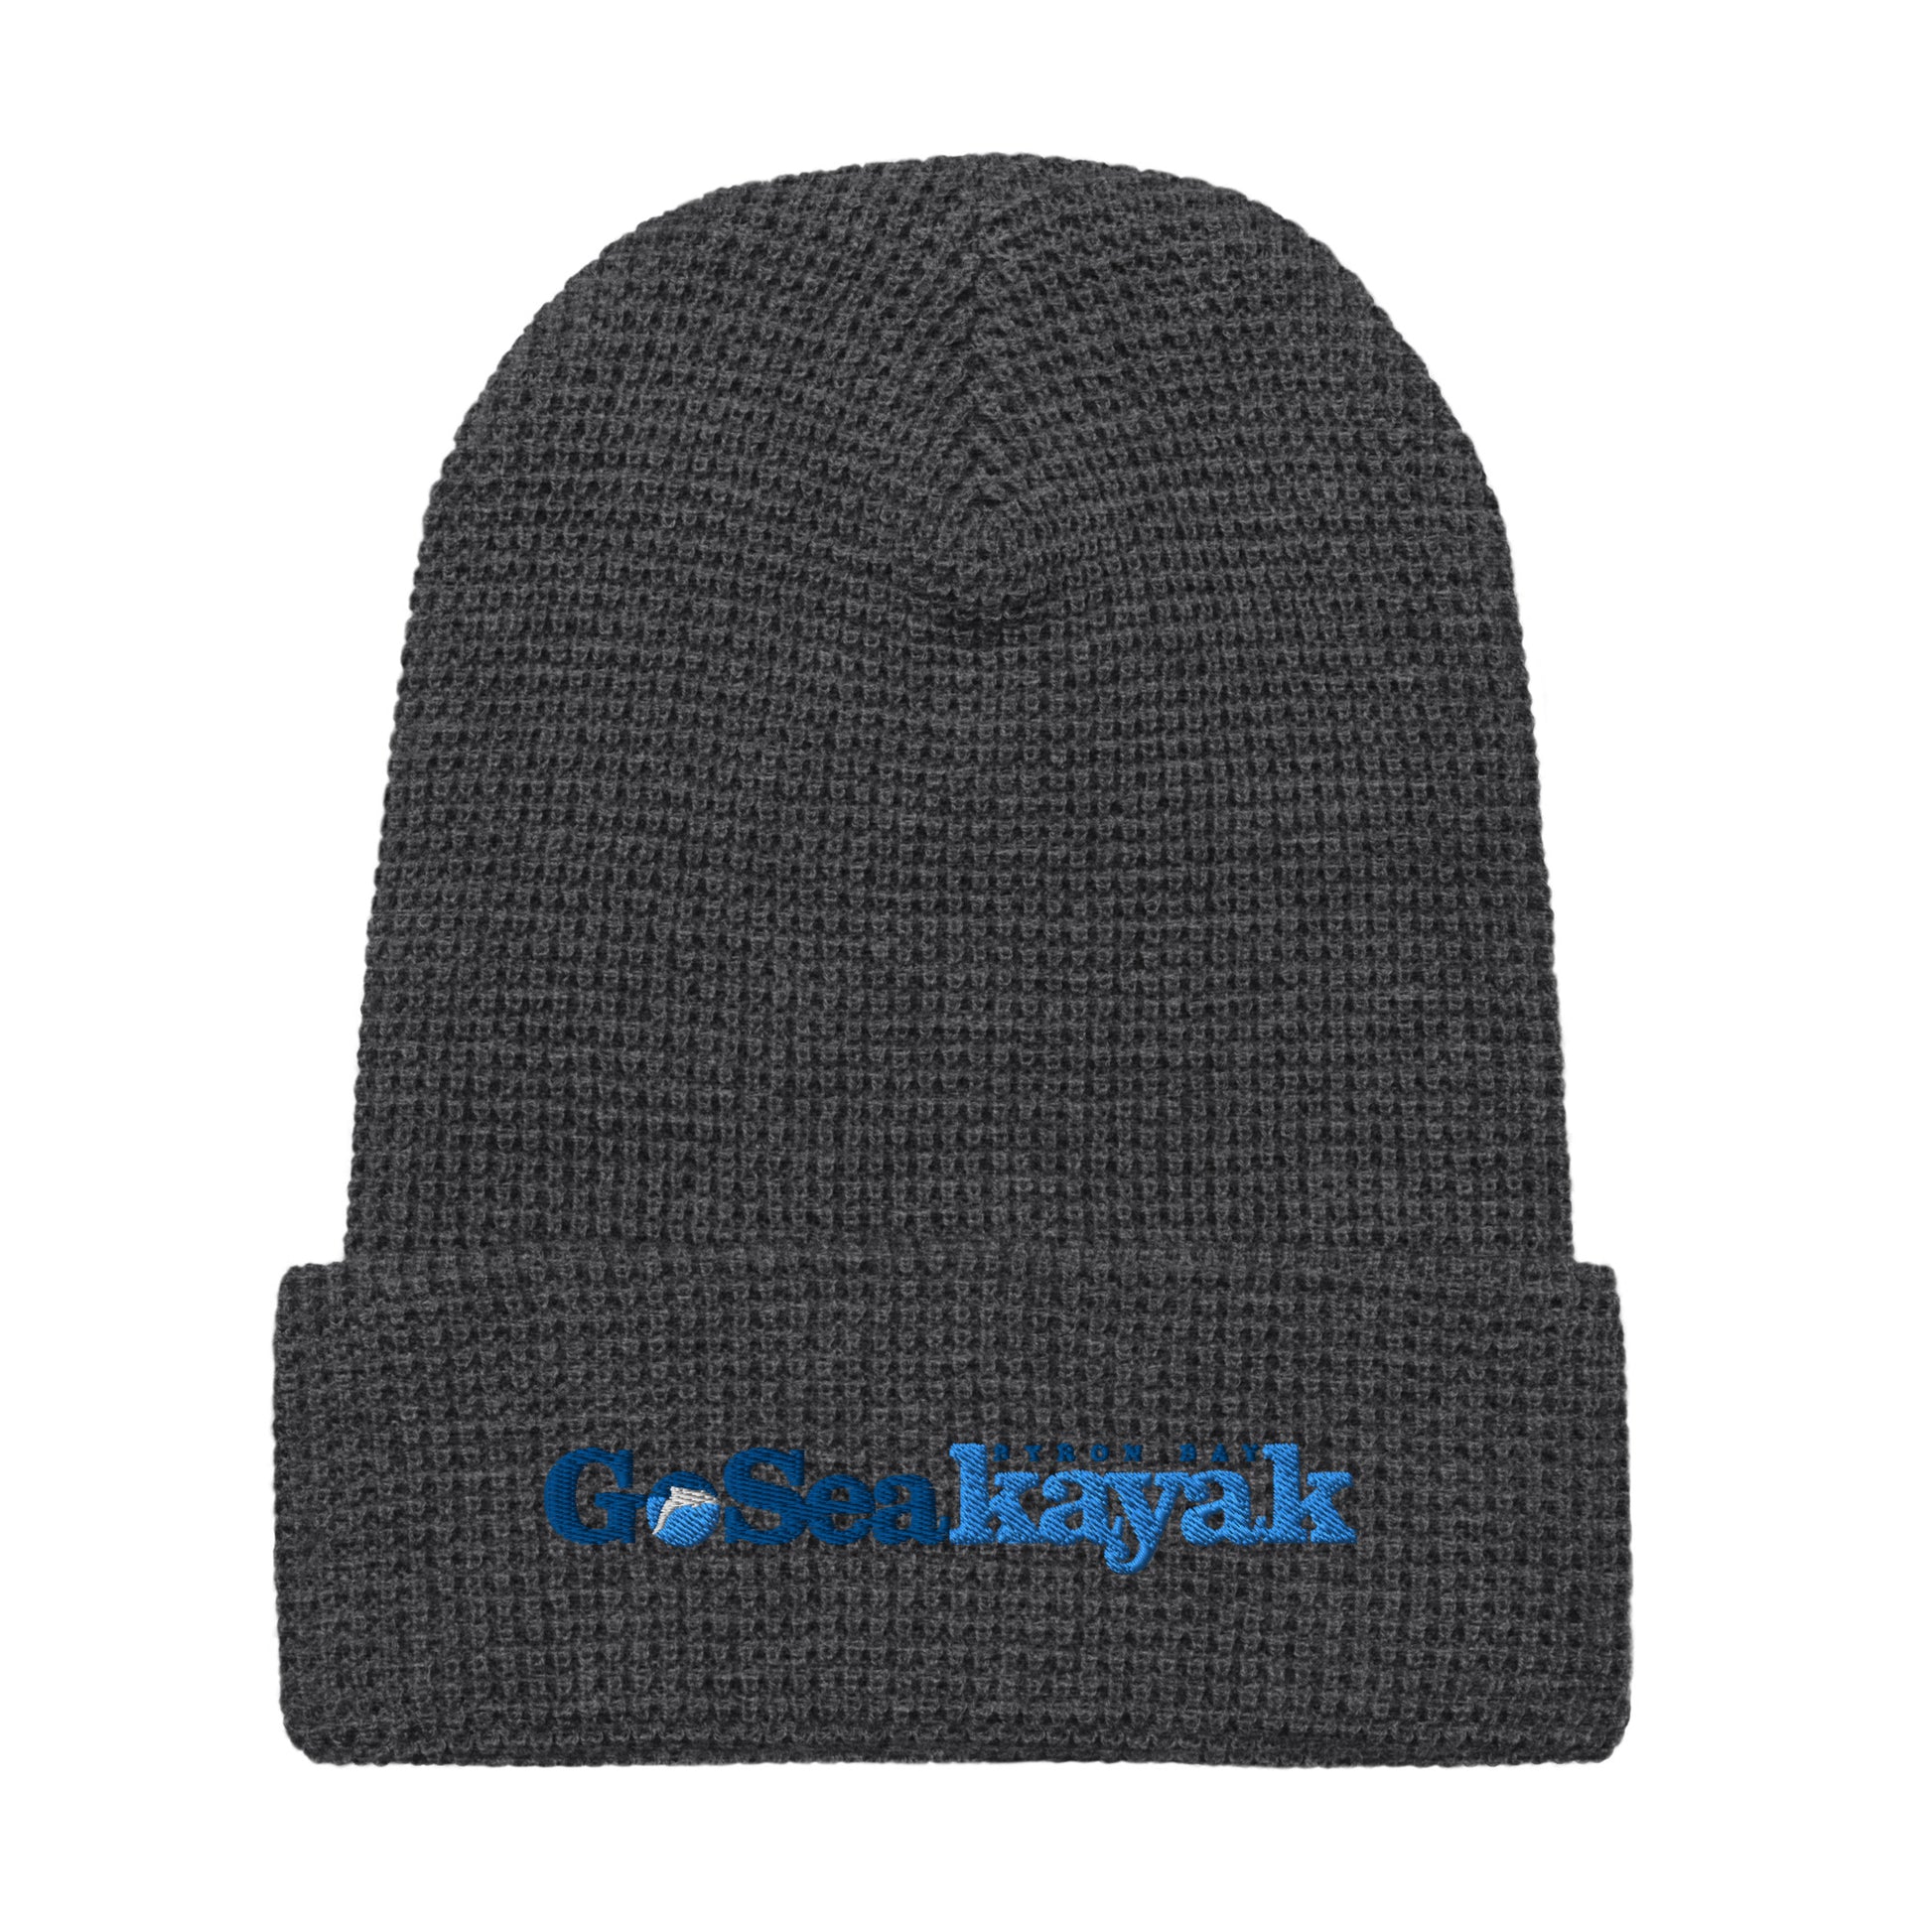  Waffle Beanie - Heather charcoal - Front flat lay view - Go Sea Kayak Byron bay logo on front - Genuine Byron Bay Merchandise | Produced by Go Sea Kayak Byron Bay 